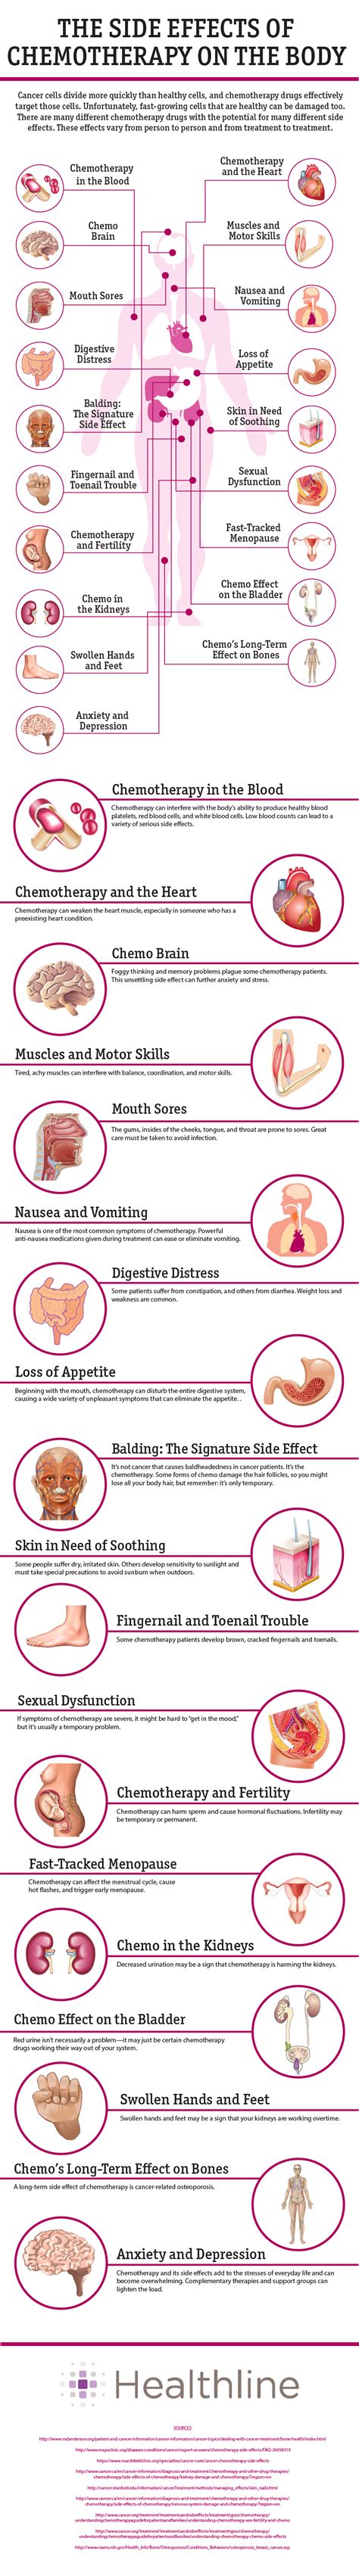 Side Effects Of Chemotherapy For Cancer Infographic